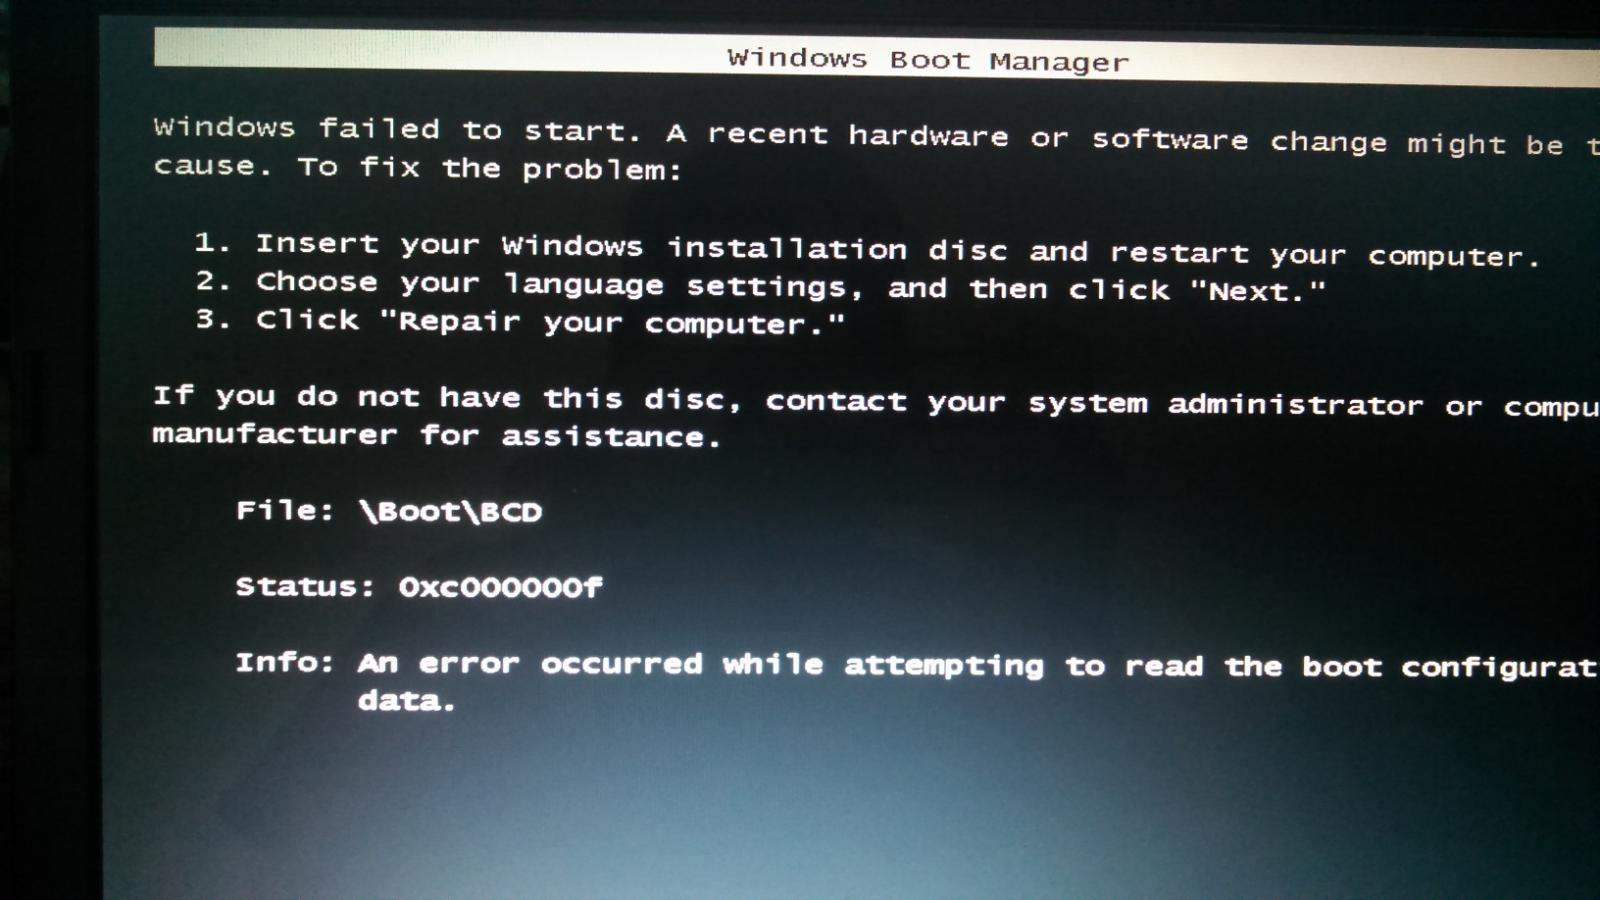 Failed to resolve address for hash 0x1817231d. Windows Boot Manager Windows failed to start. Windows failed to start a recent. Windows Boot Manager ошибка. Windows Boot Manager failed to start.